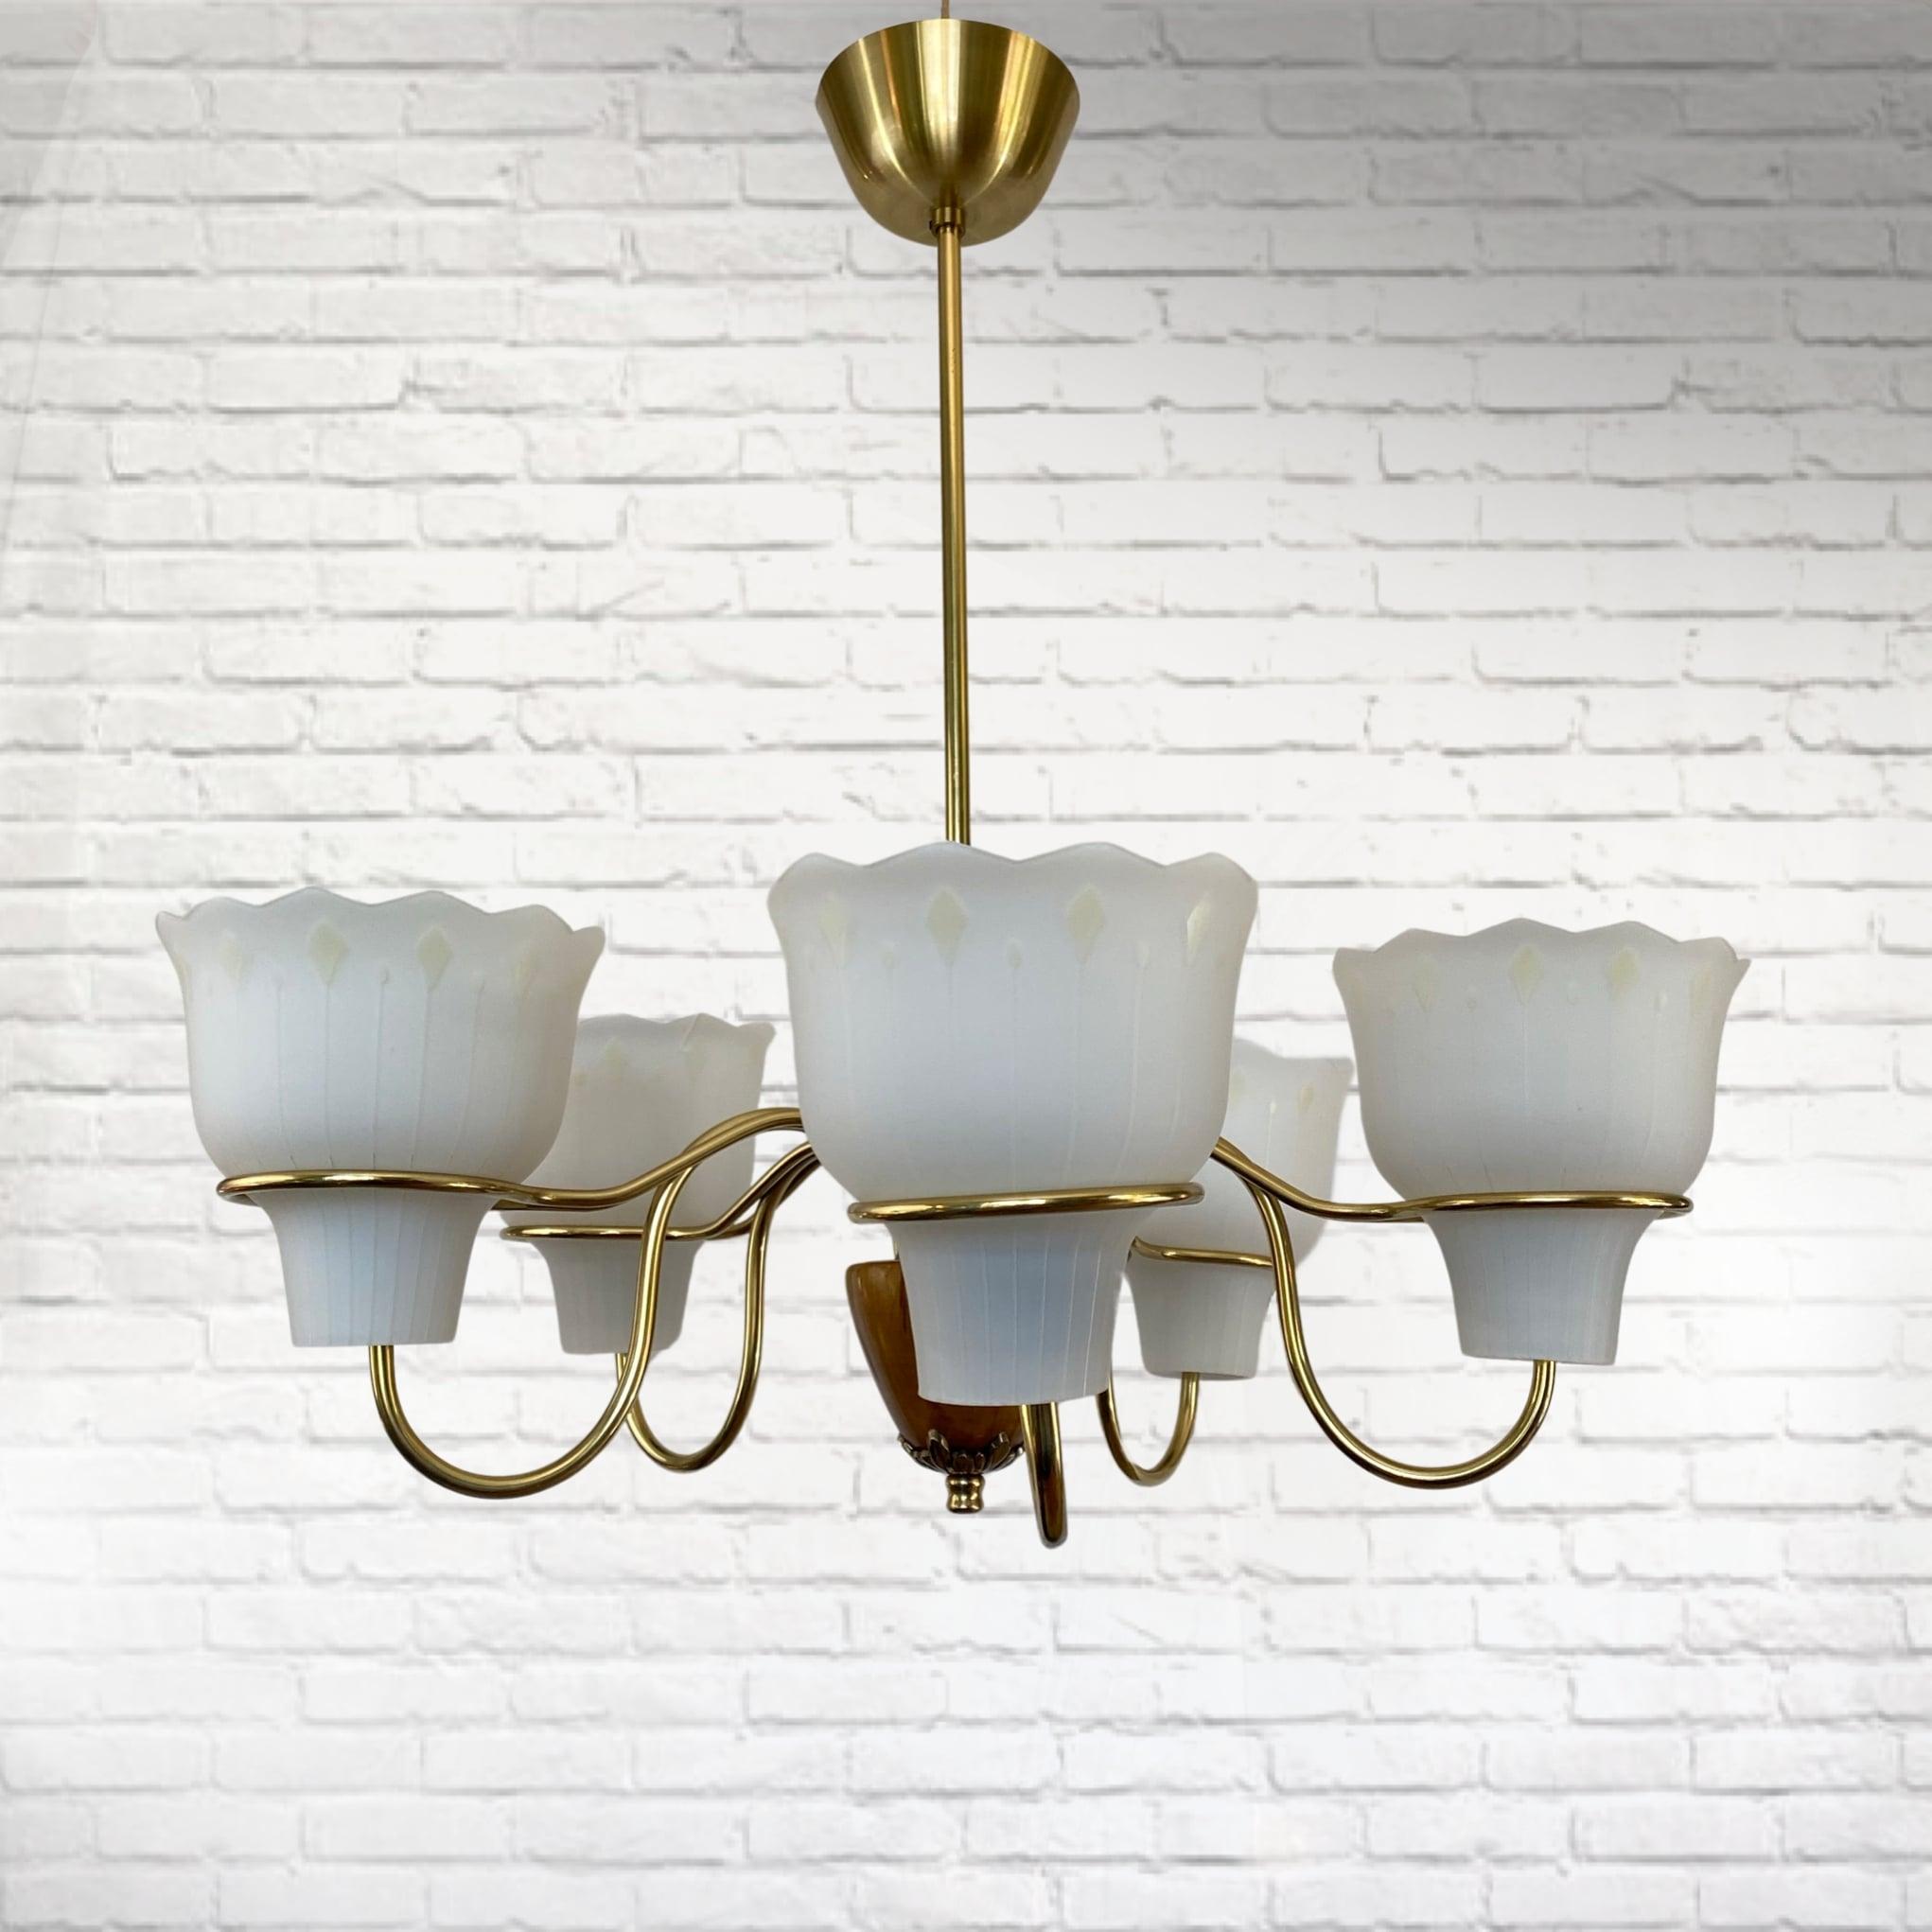 Mid-20th Century Swedish modernist chandelier, brass and glass, 1940s